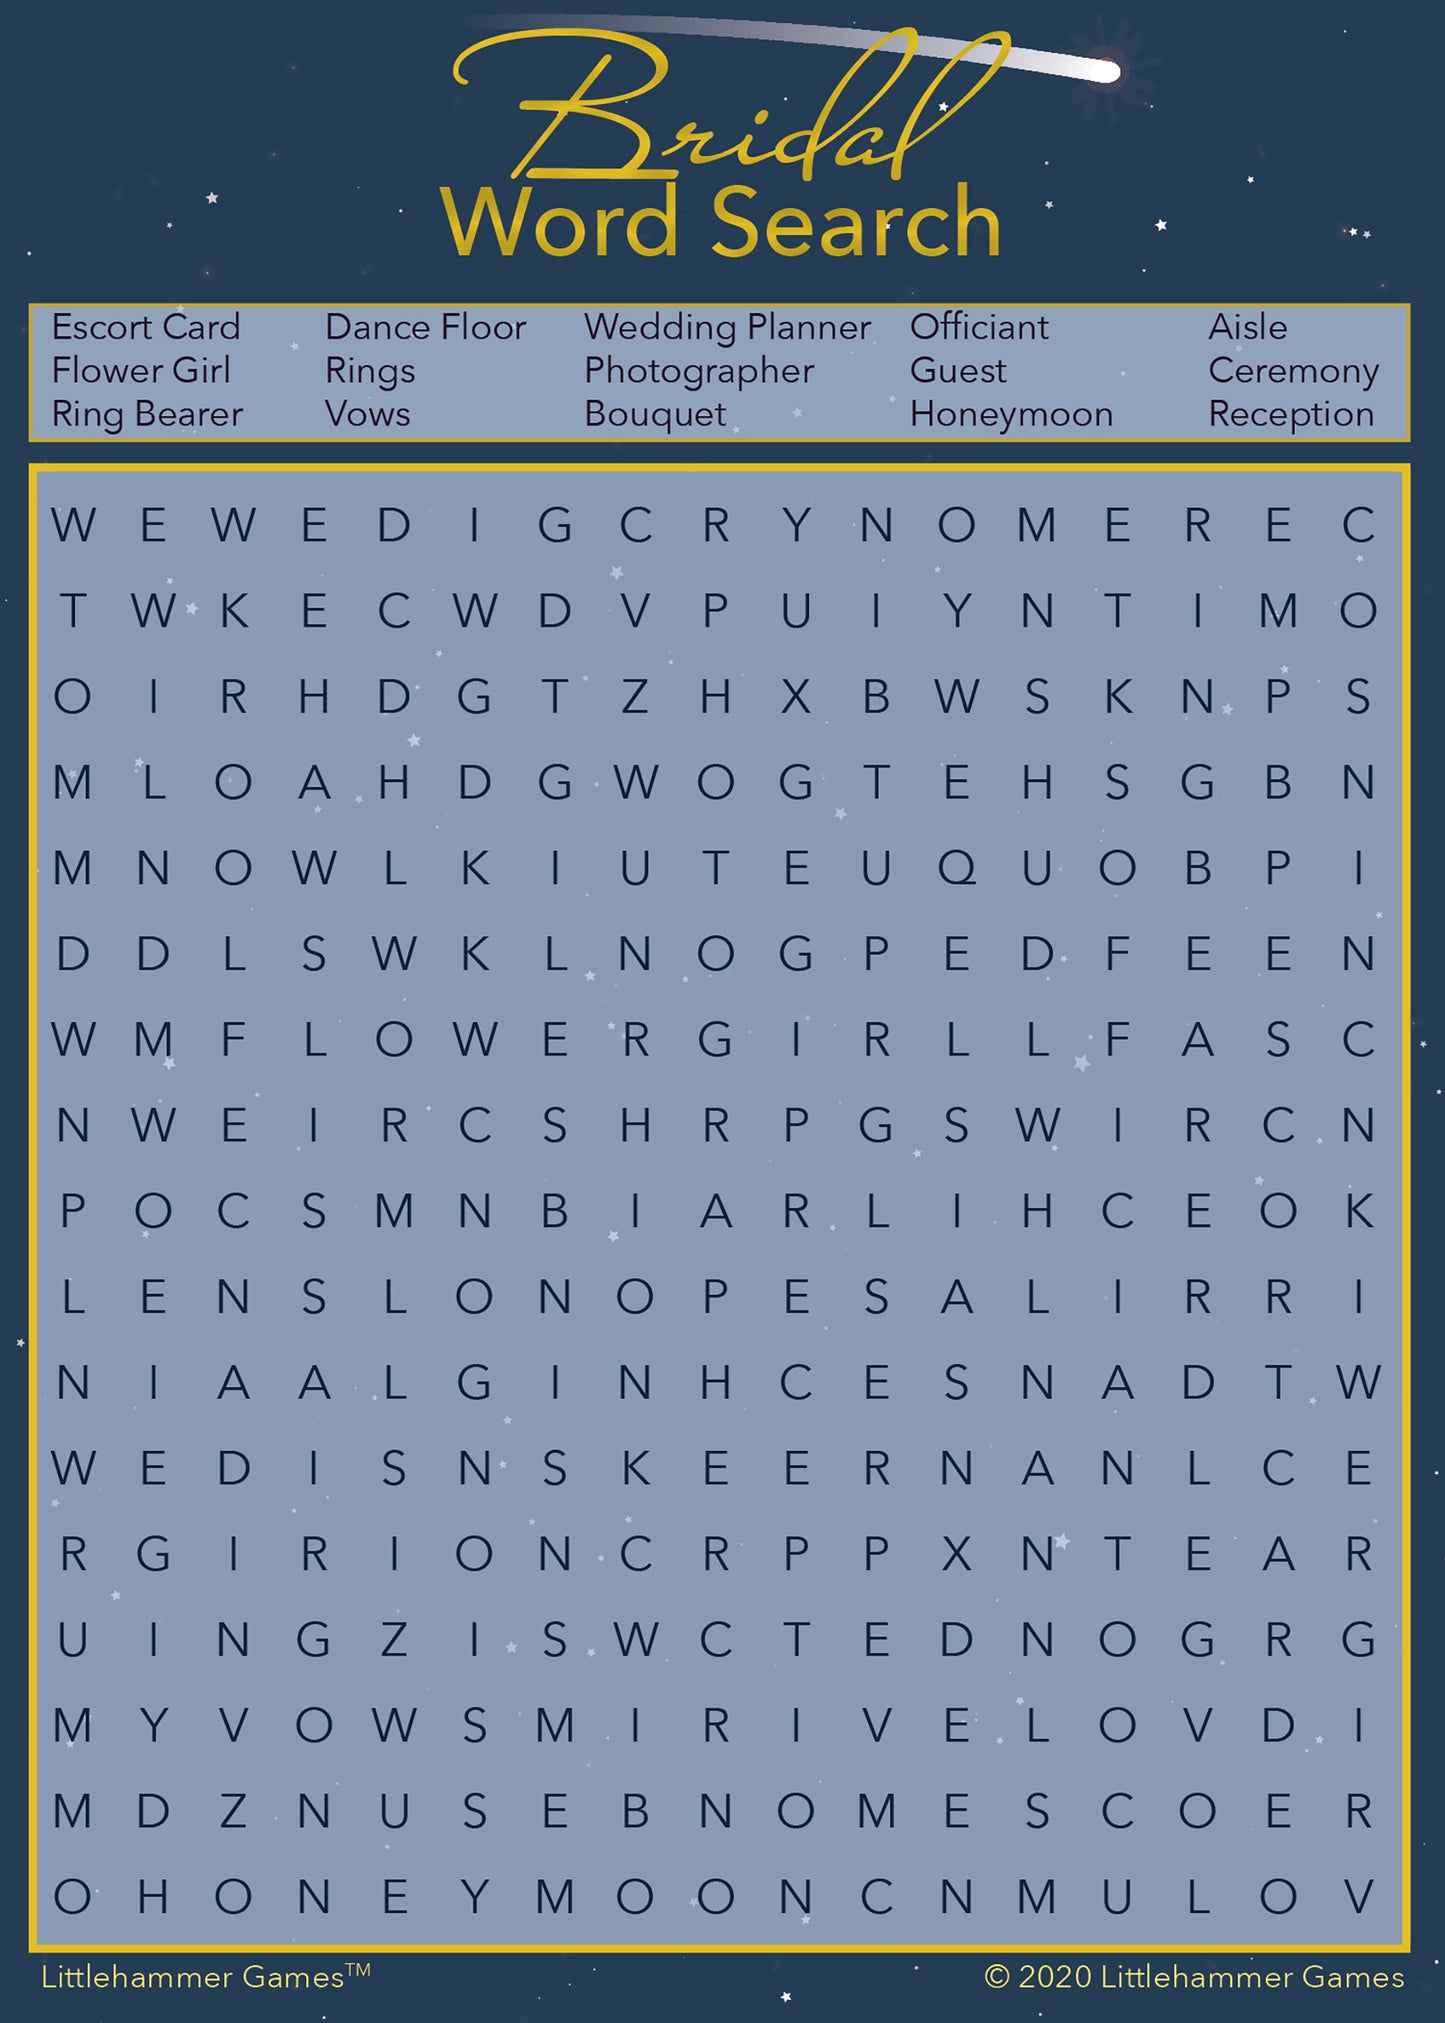 Bridal Word Search game card with a shooting star background